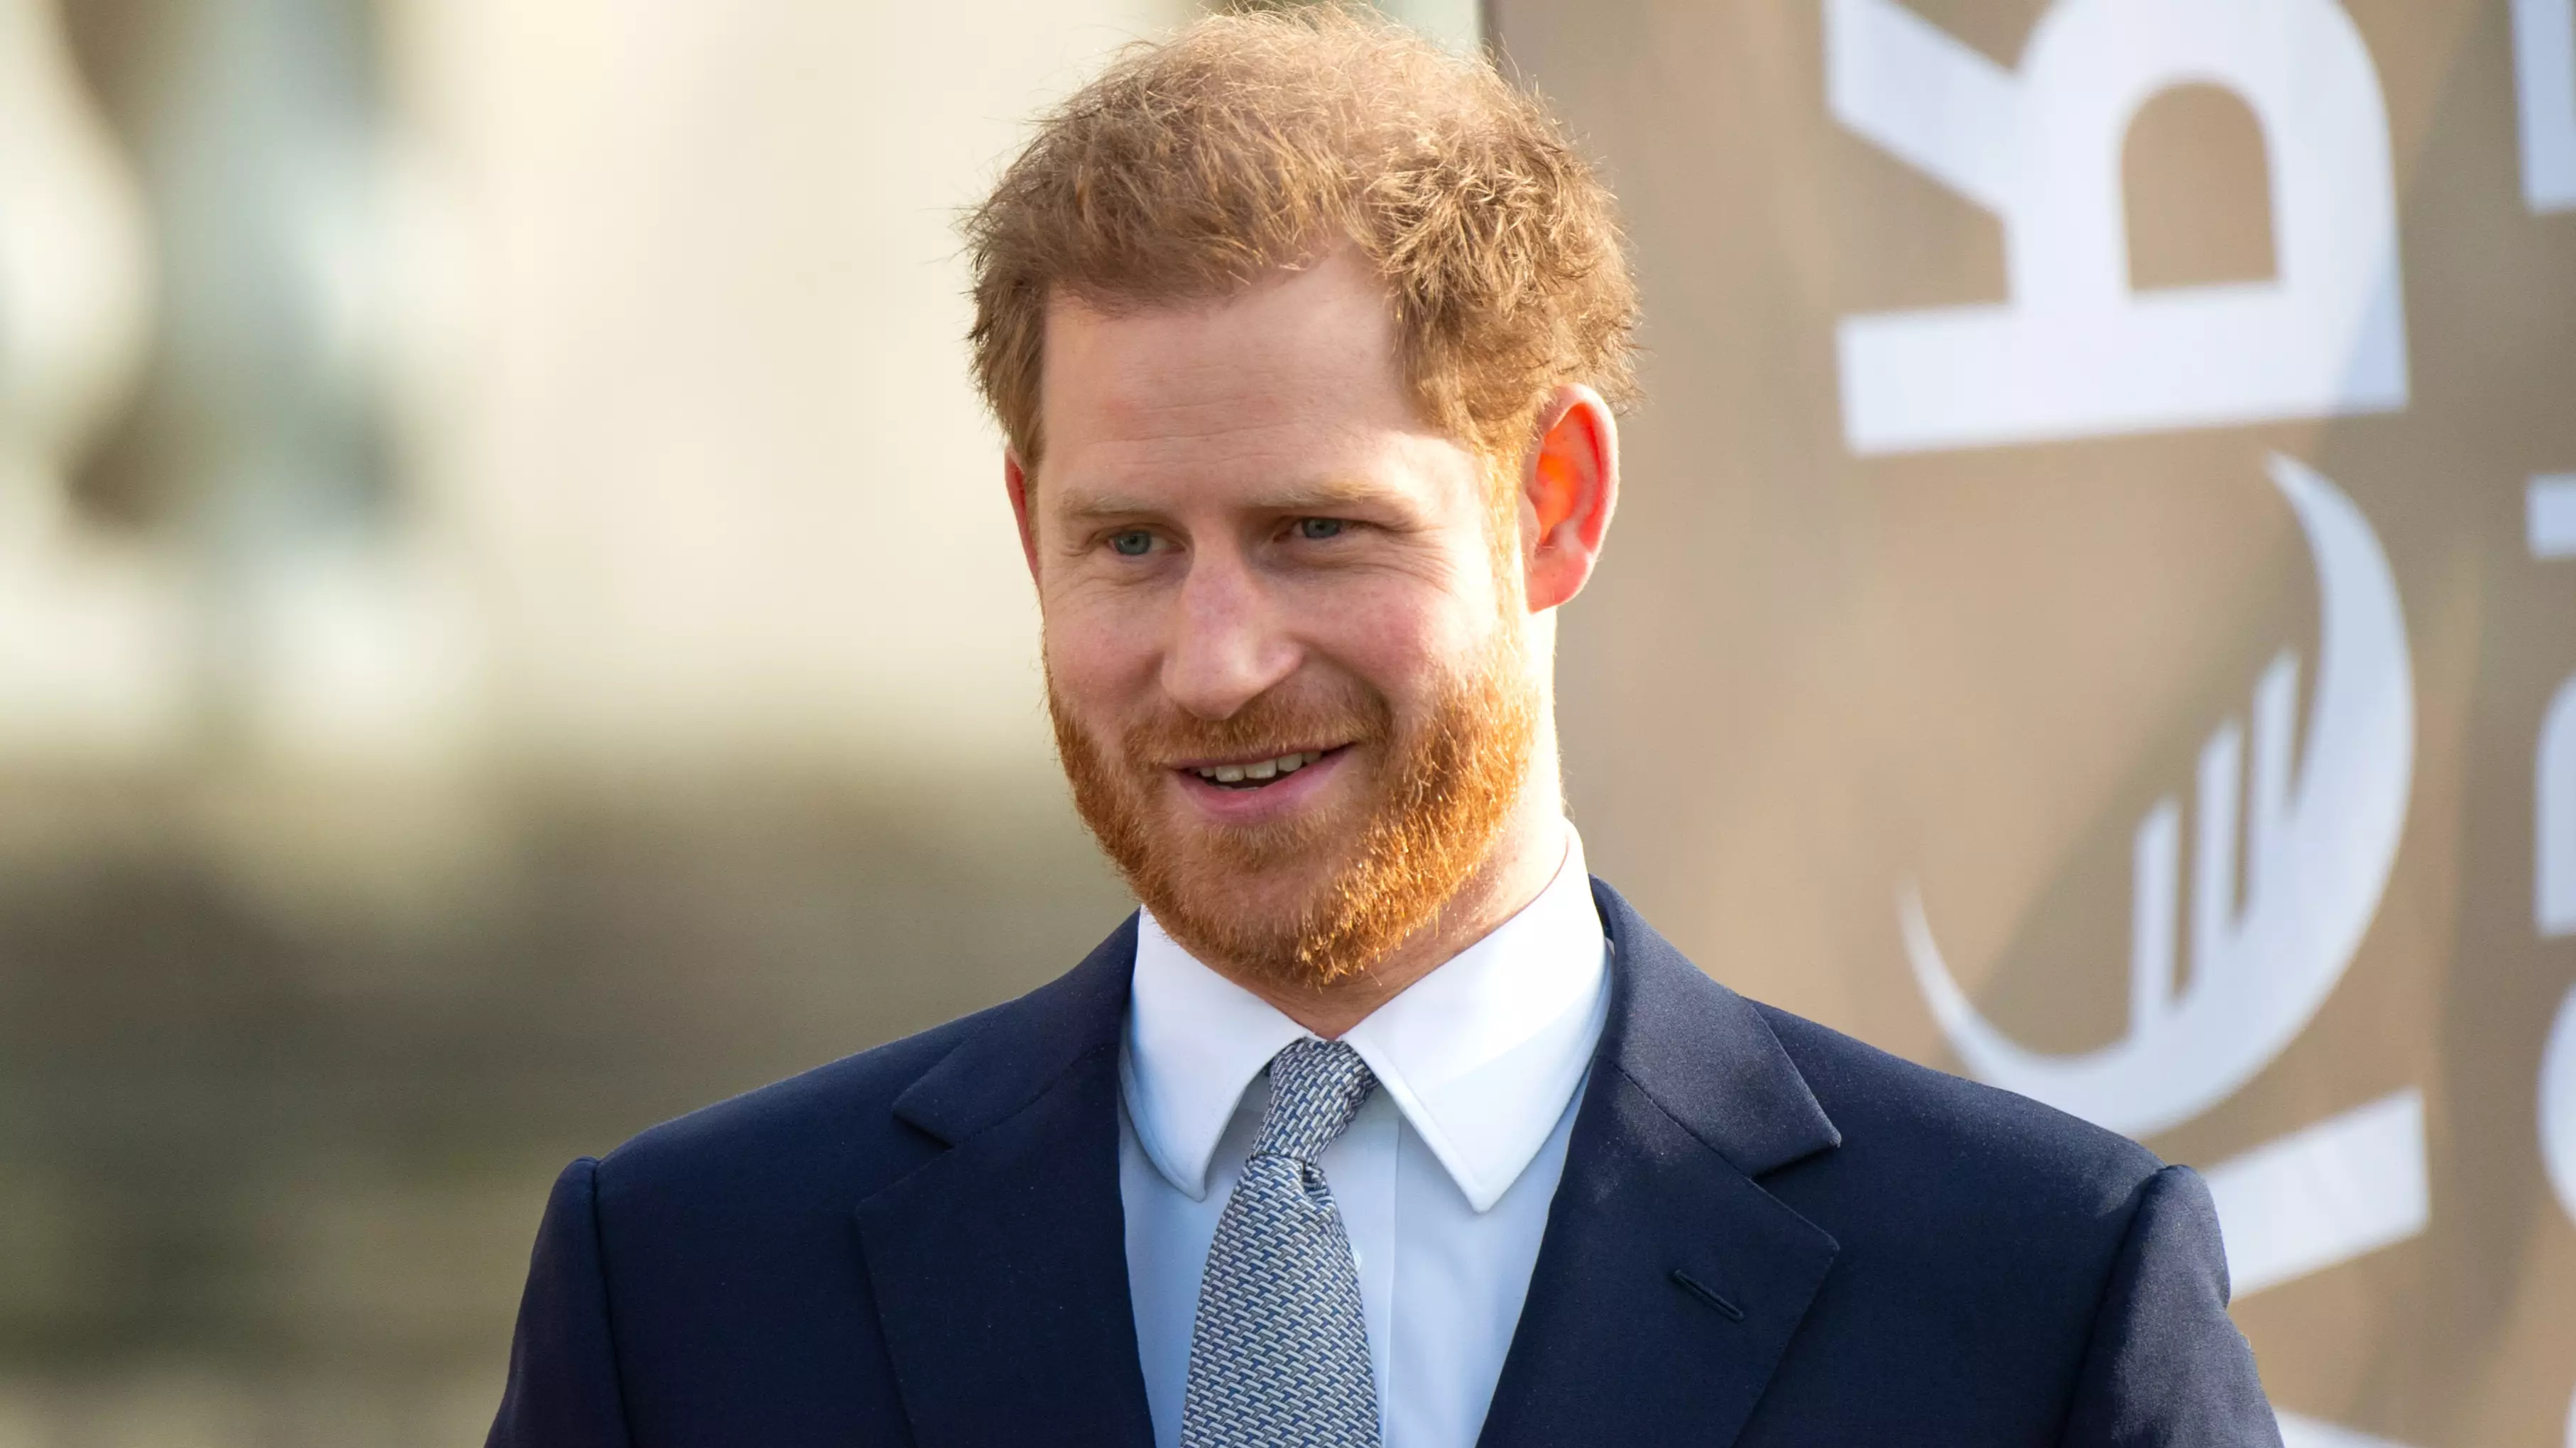 Prince Harry Releases Statement After Stepping Back From Royal Duties